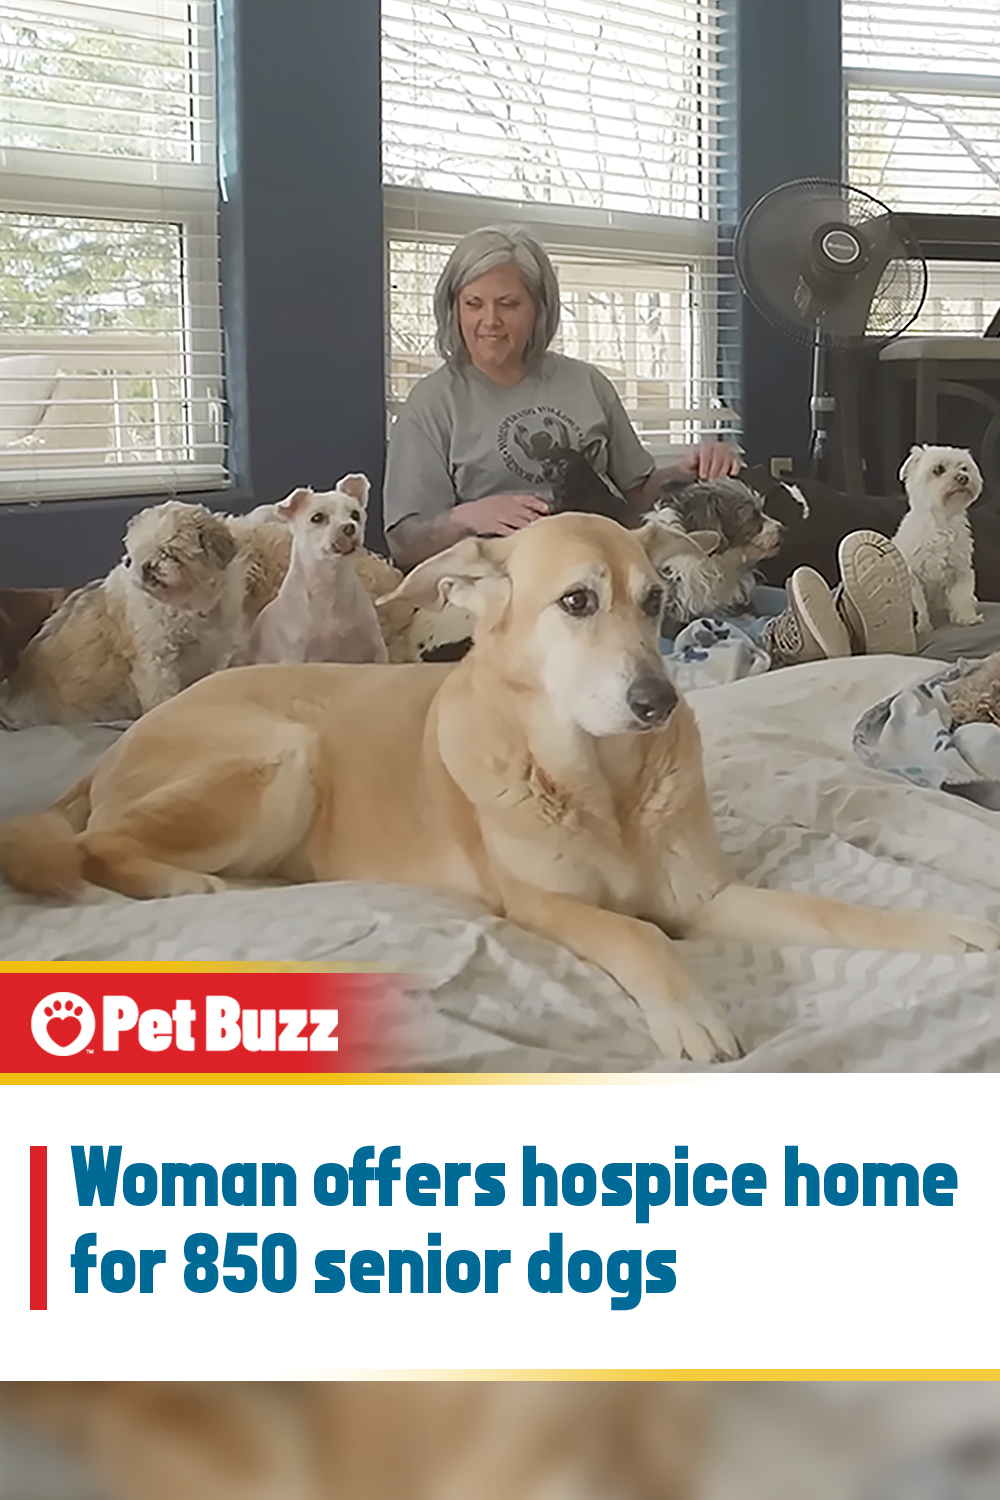 Woman offers hospice home for 850 senior dogs